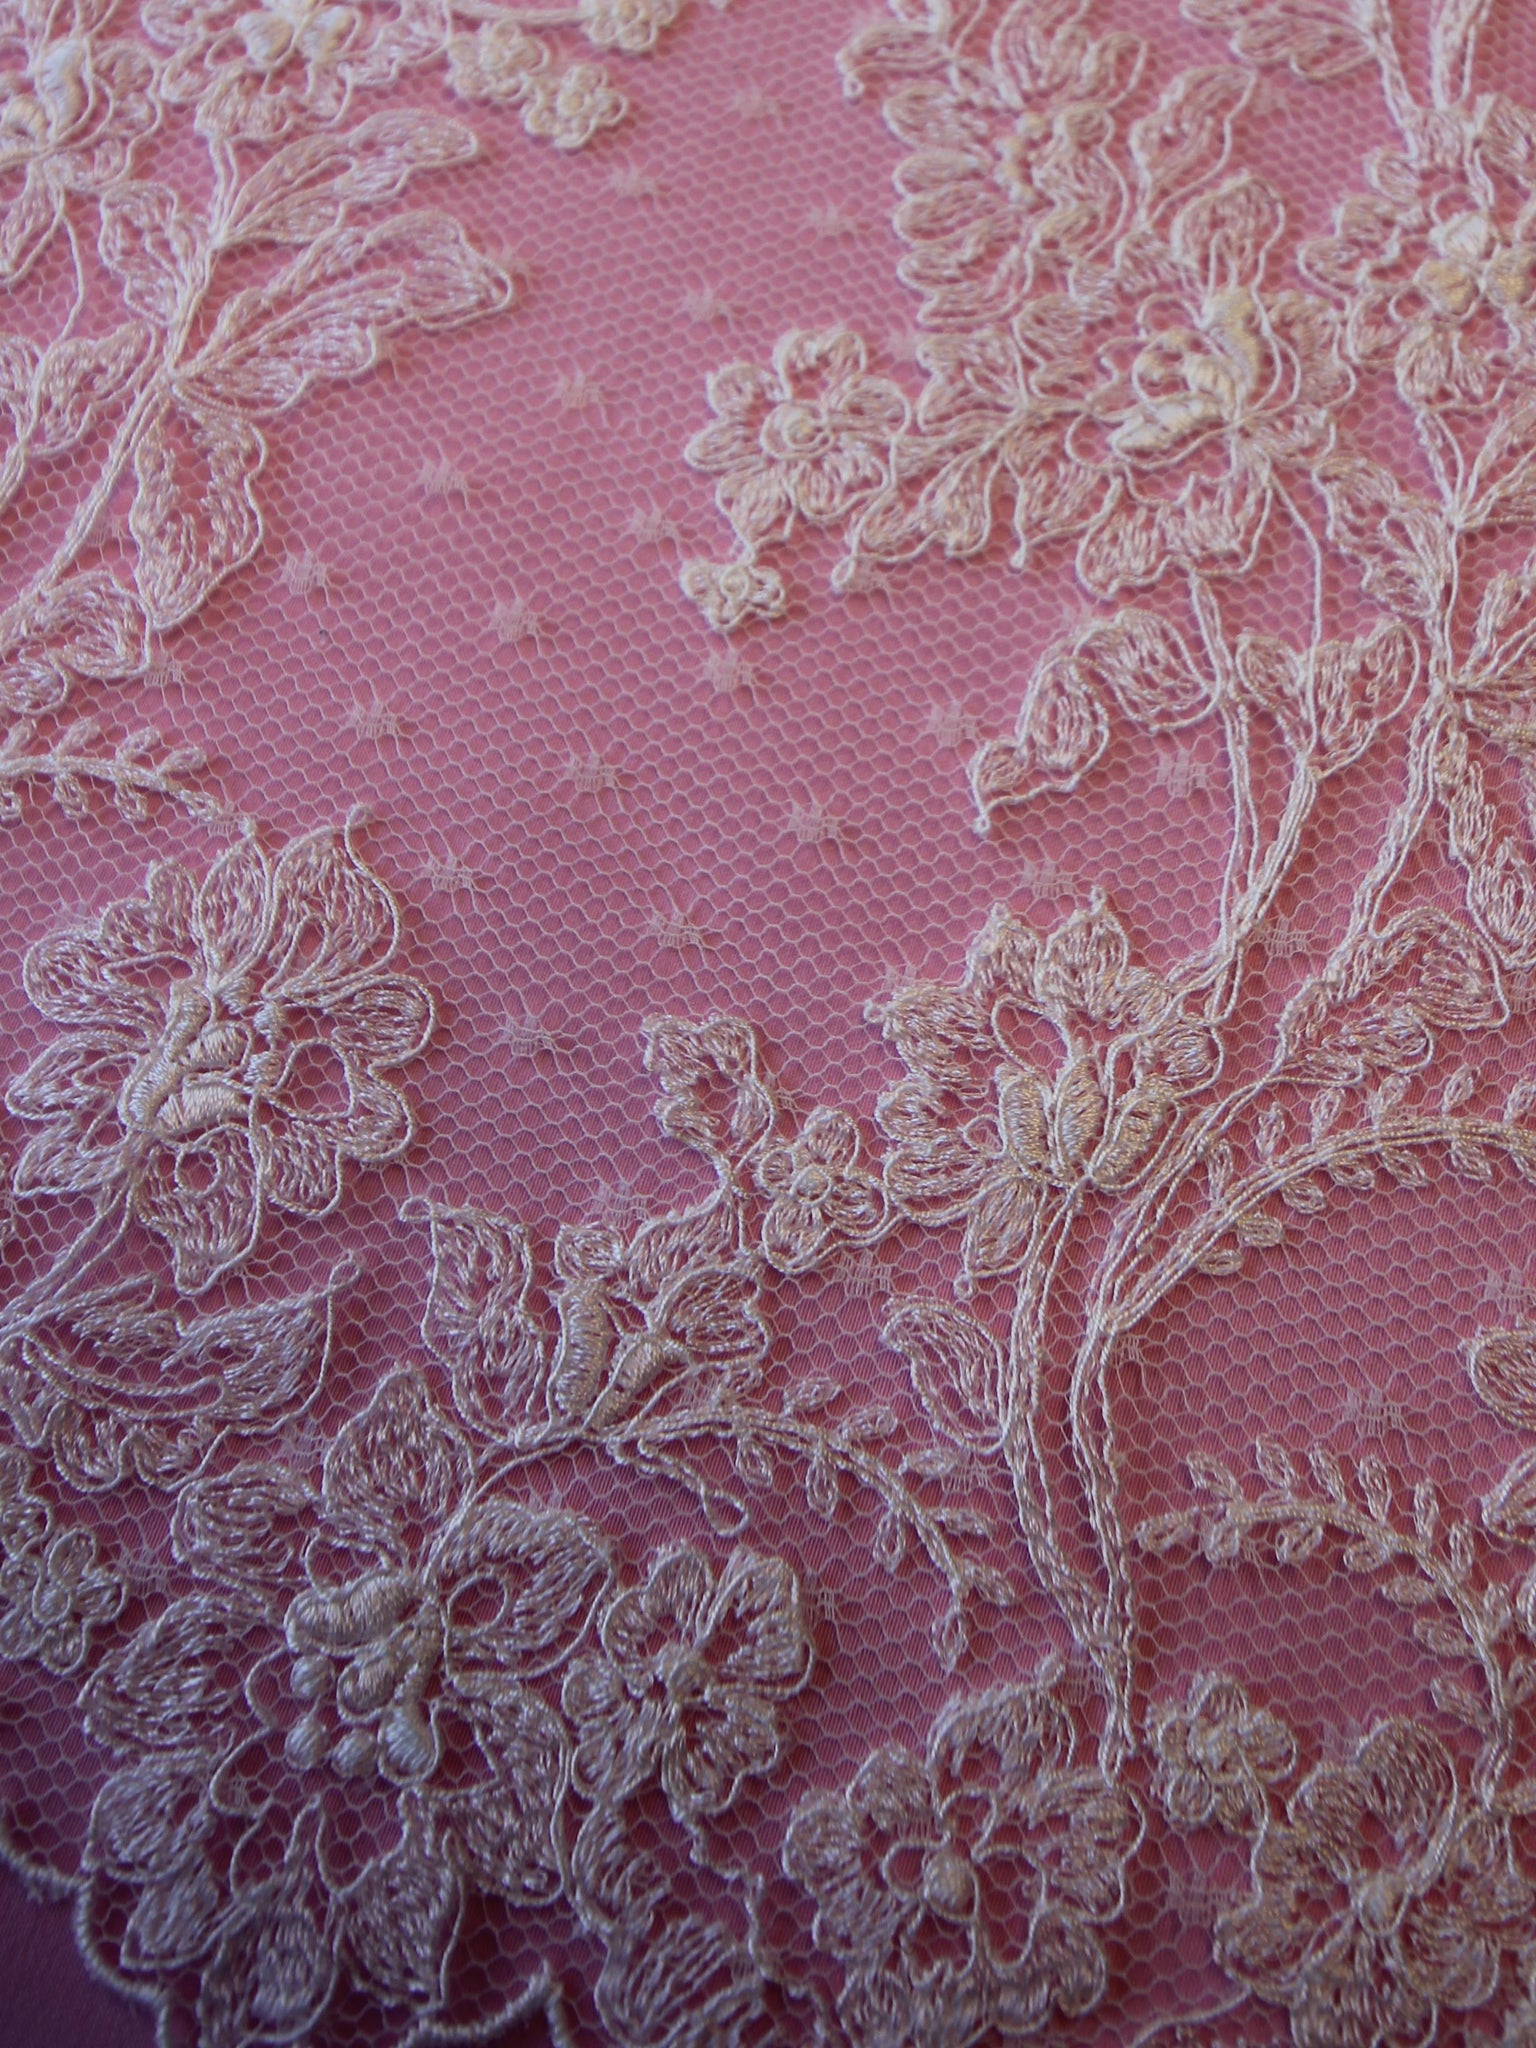 51 Wide Vintage Embroidered Floral Motif Scalloped Cotton Lace